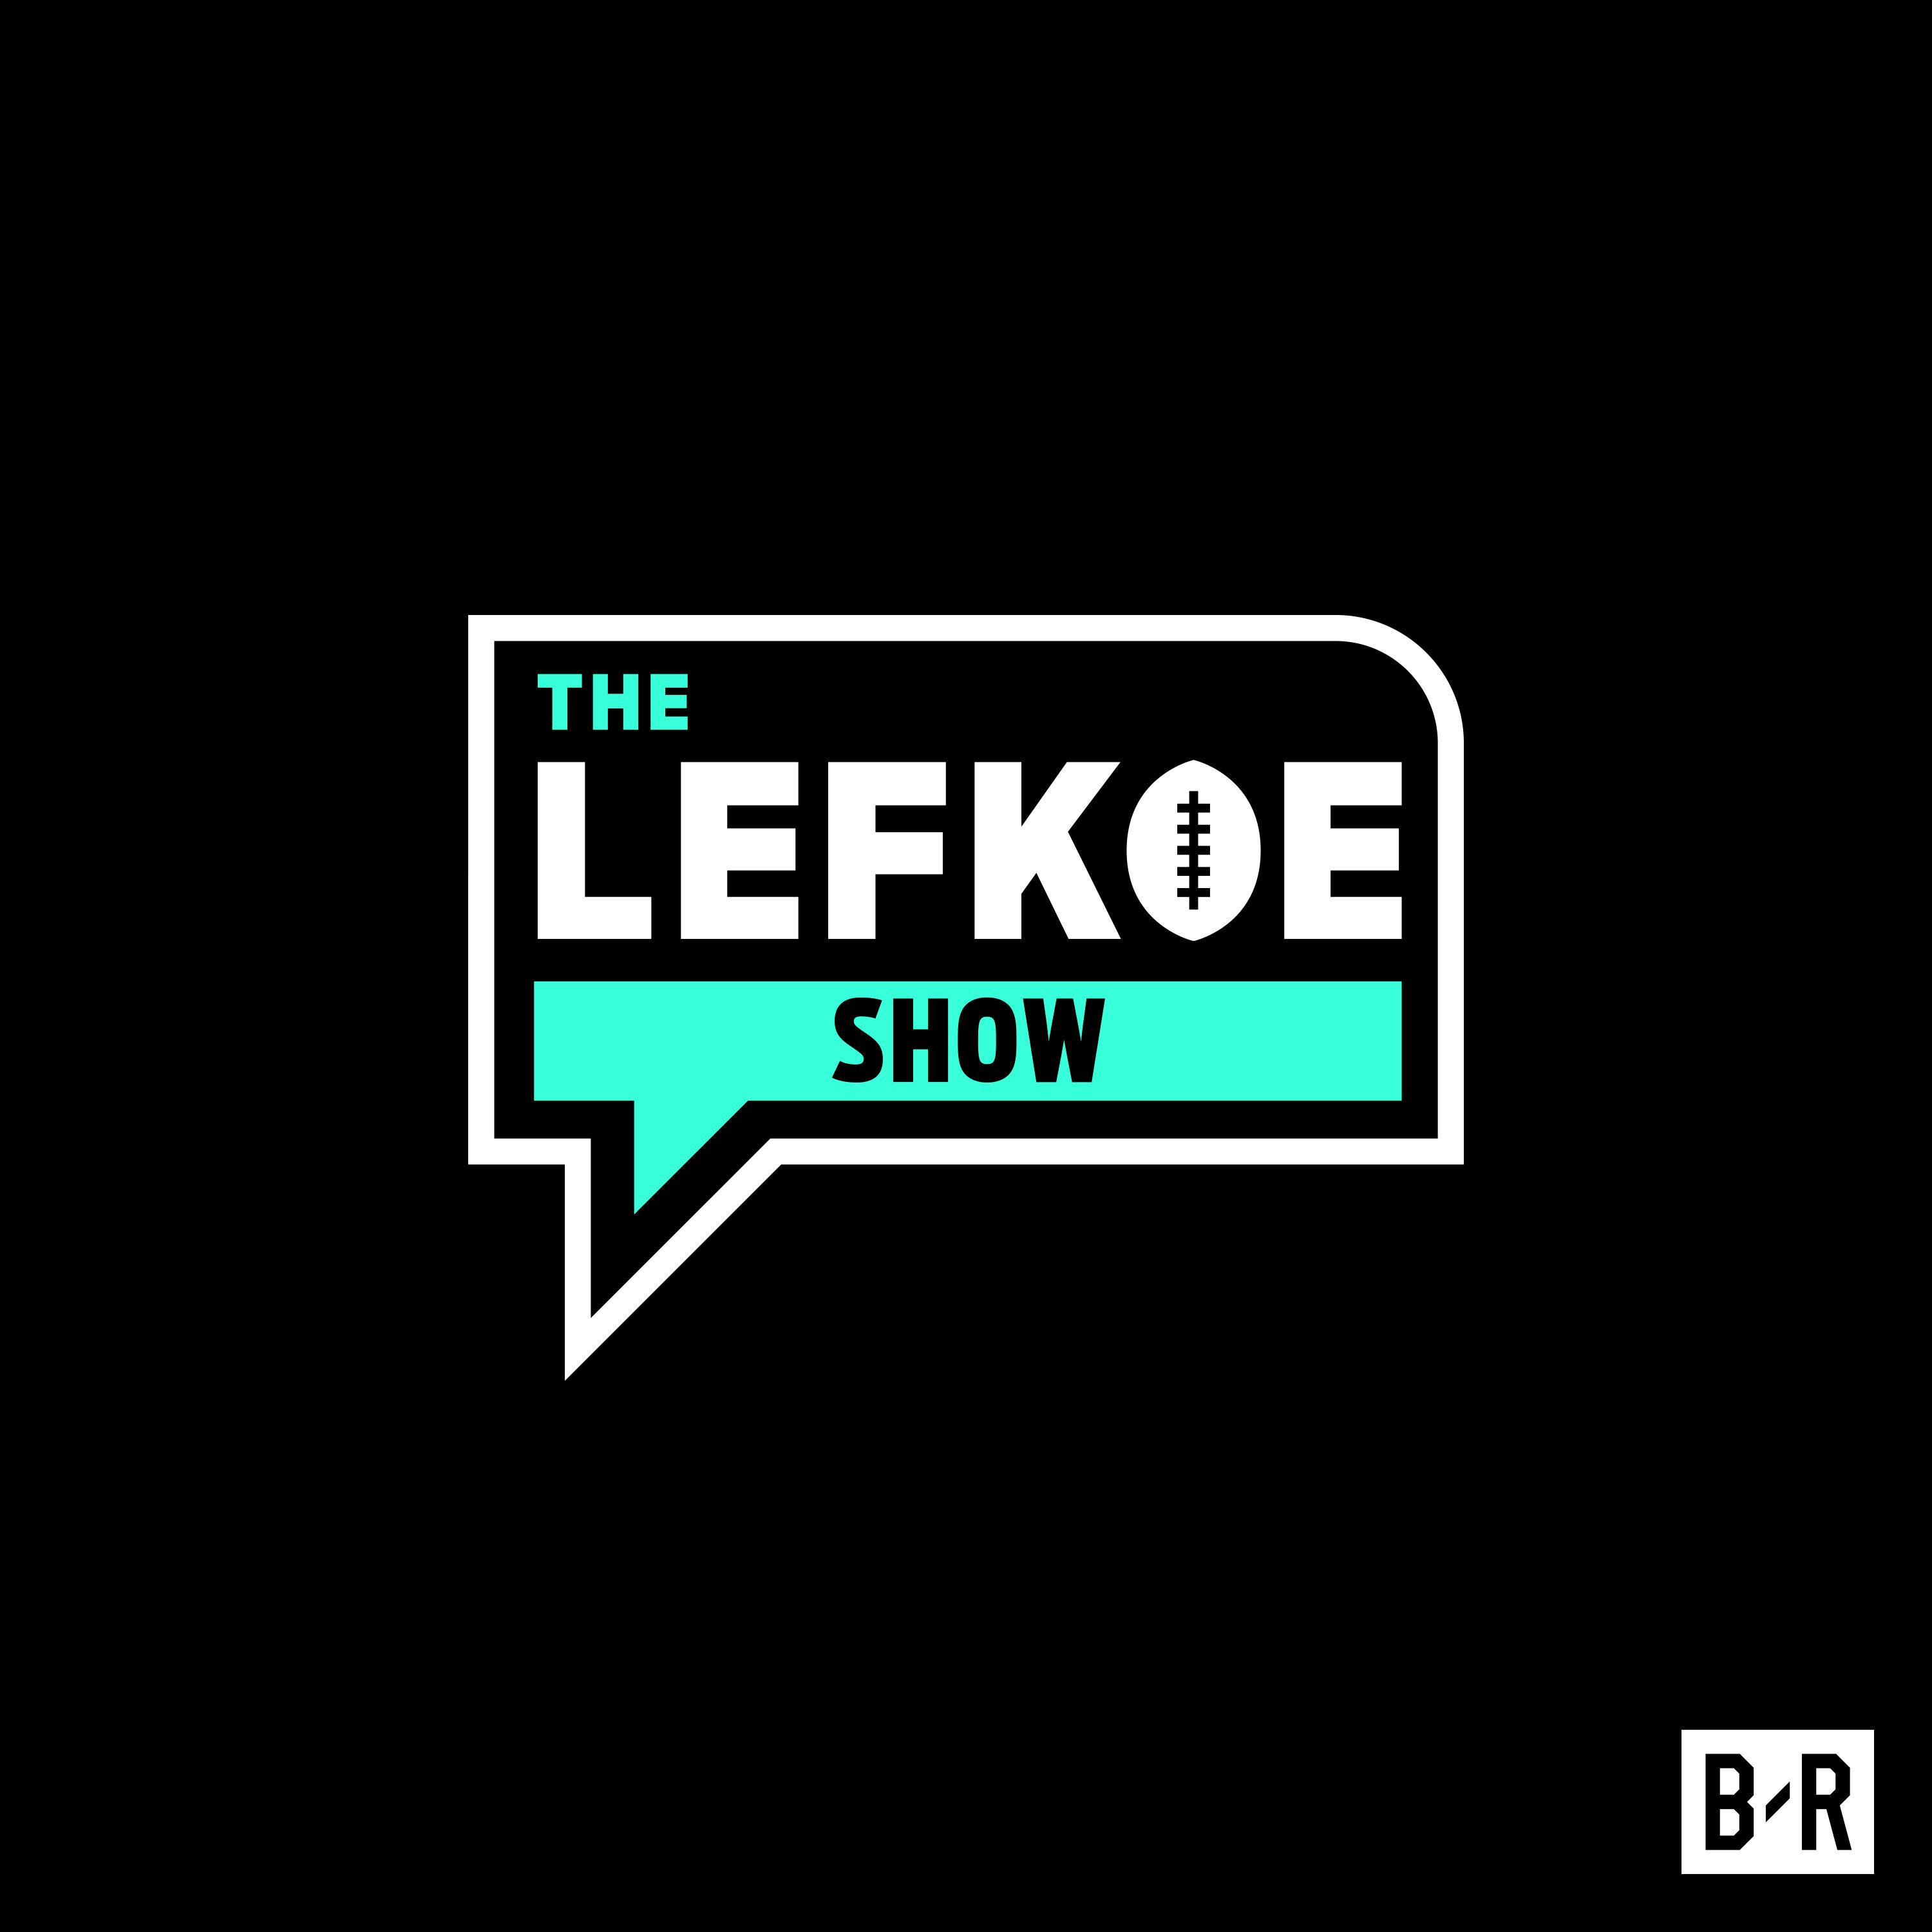 Rich Kleiman (Kevin Durant's Manager/Business Partner) on Working with Jay-Z, His Keys to Success, and More | The Lefkoe Show